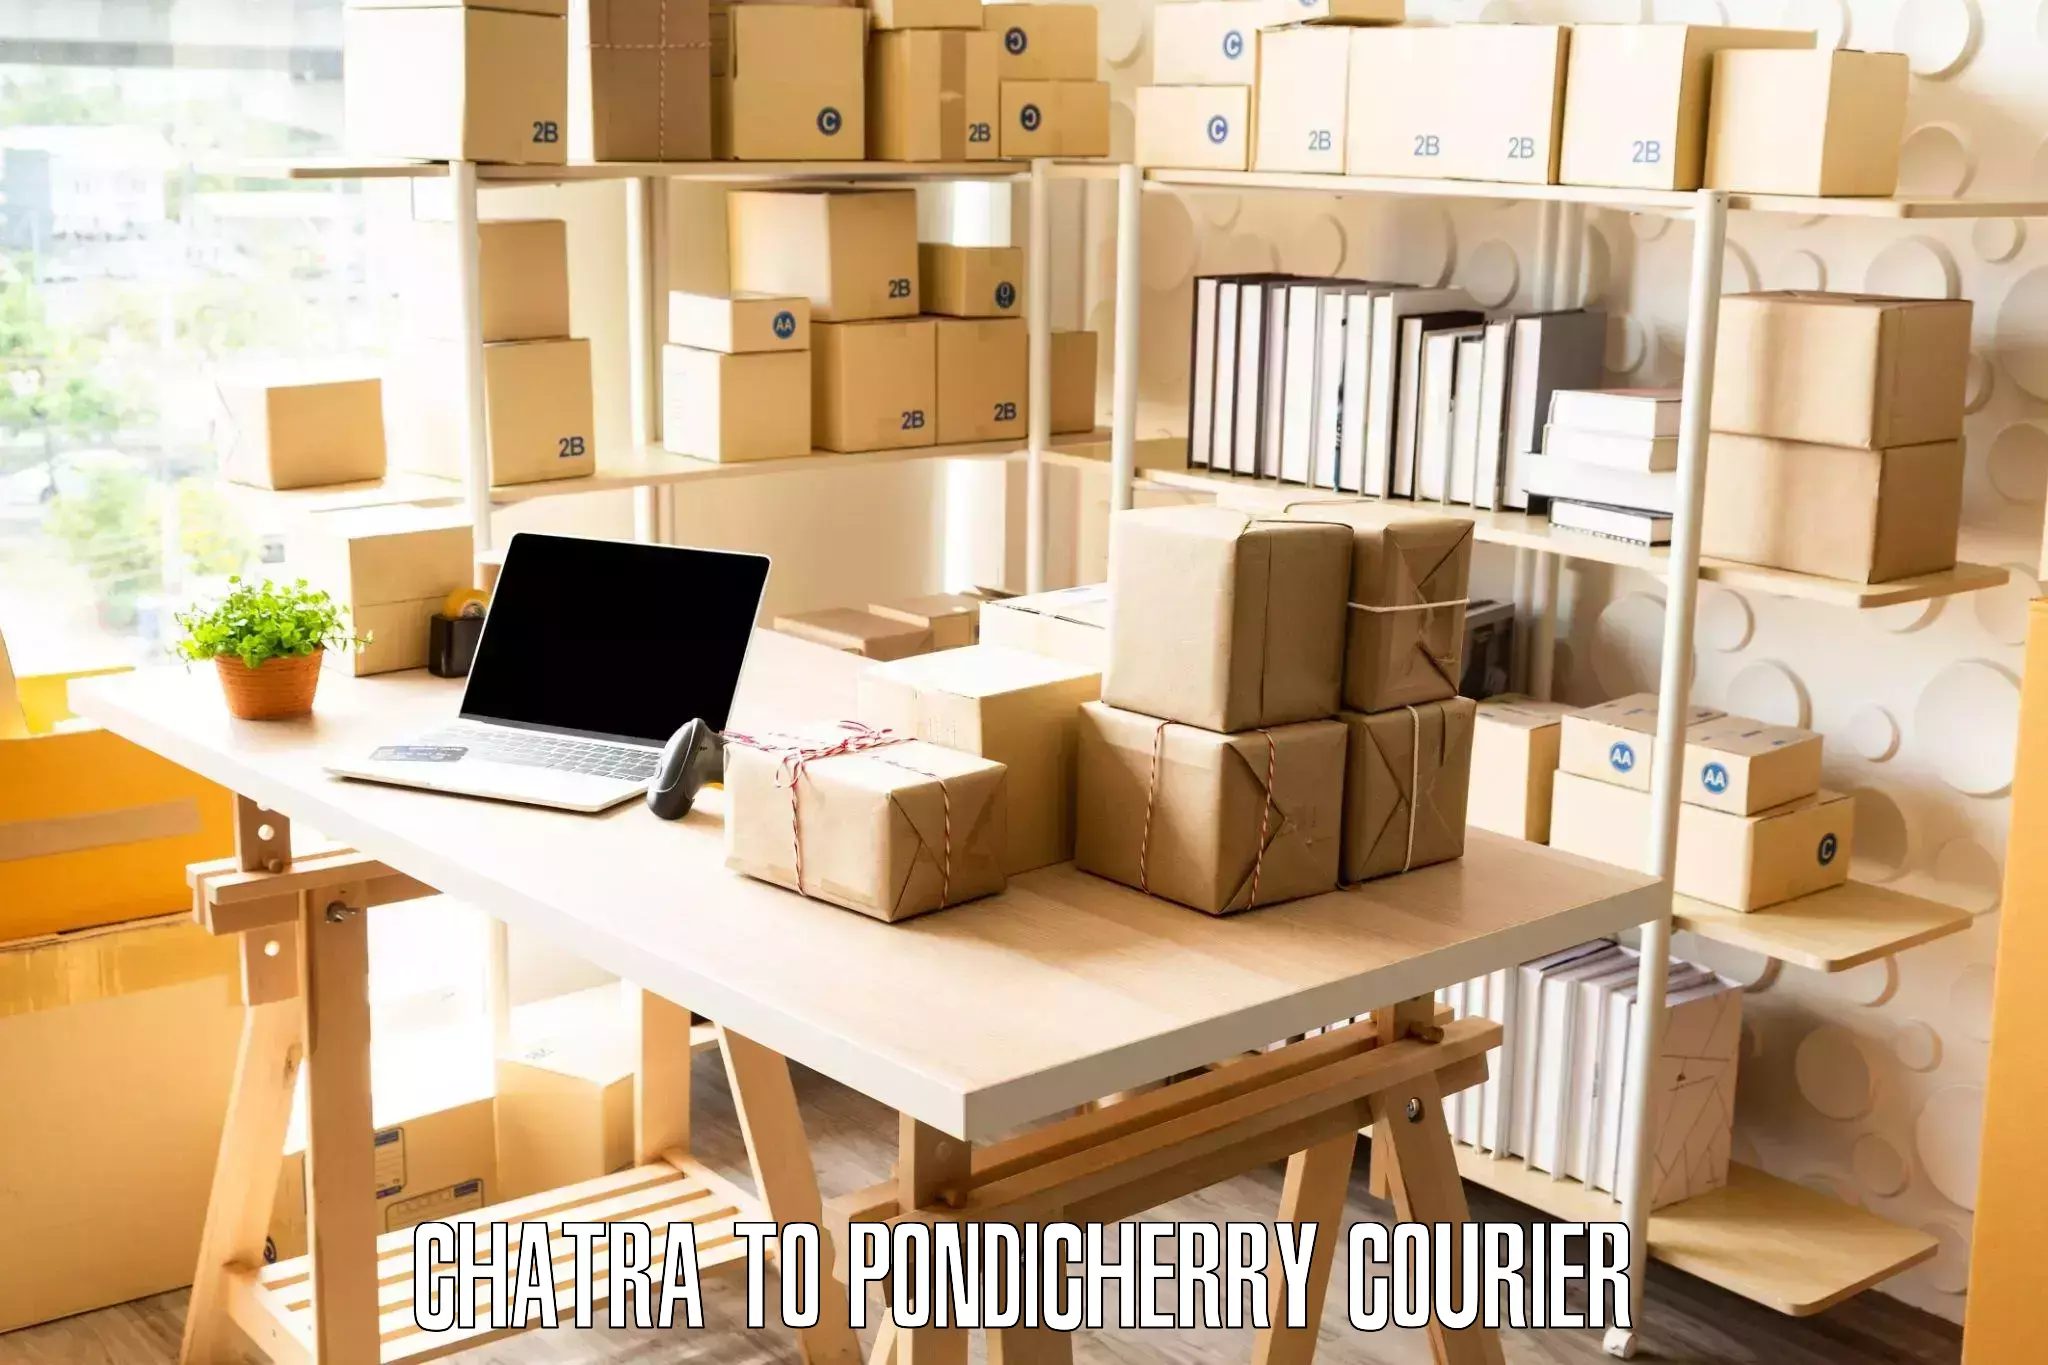 Moving and packing experts Chatra to Pondicherry